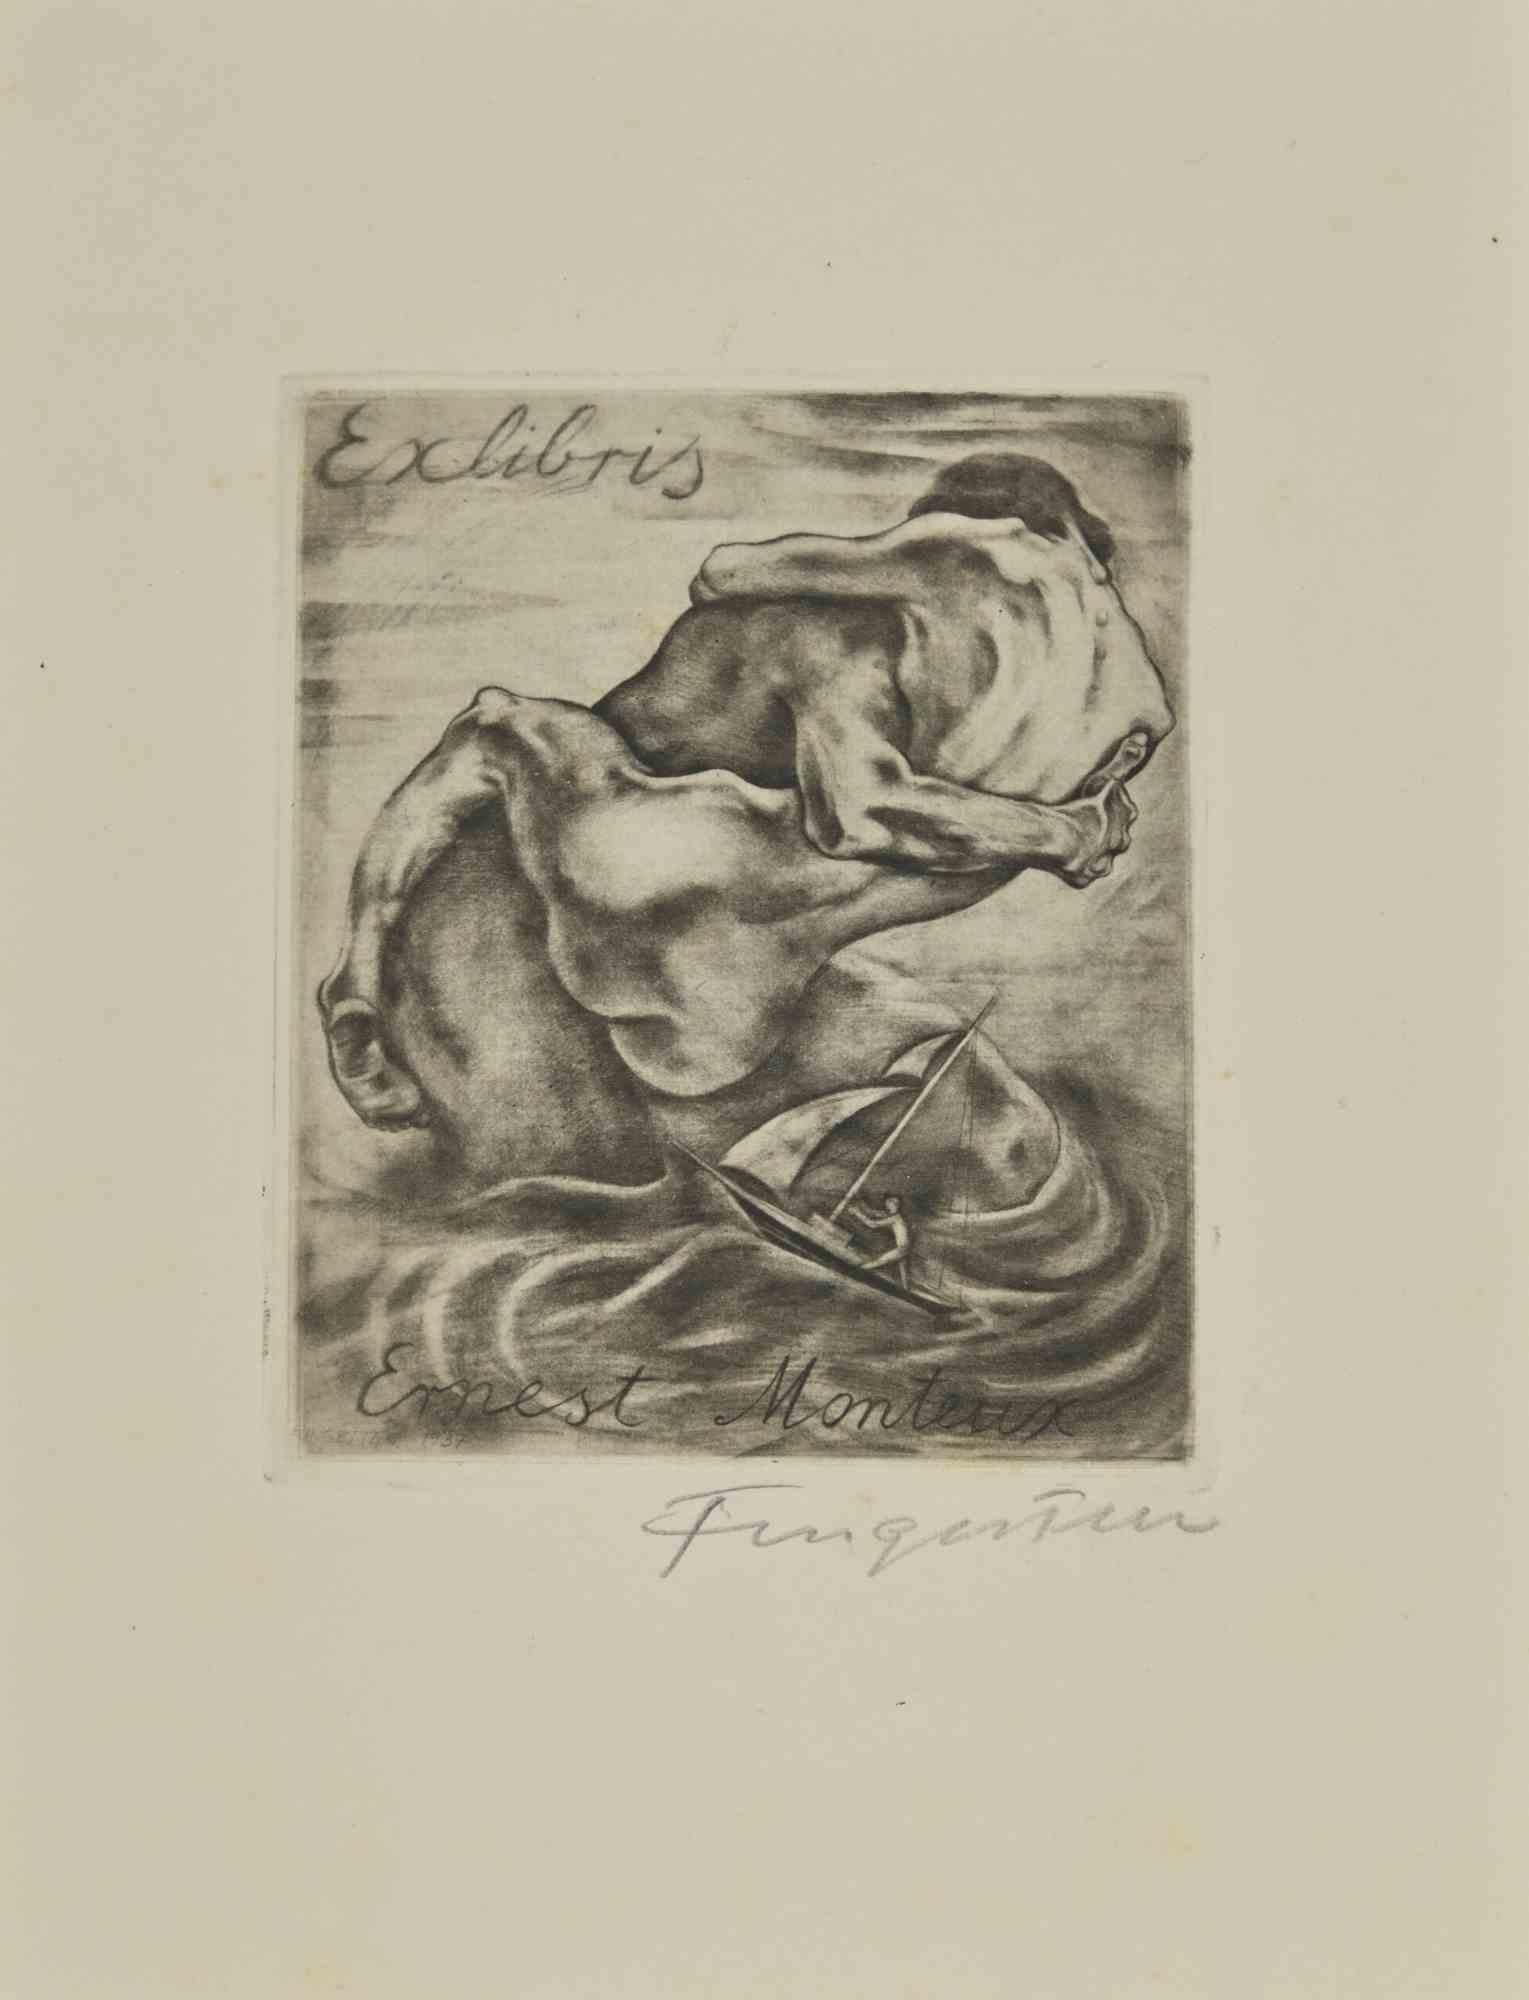 Ex Libris - Ernest Monteux is an Etching print created by  Michel Fingesten in 1930s.

Hand signed on the lower margin. Numbered on the left corner, ex. 149/150

Good conditions.

Michel Fingesten (1884 - 1943) was a Czech painter and engraver of